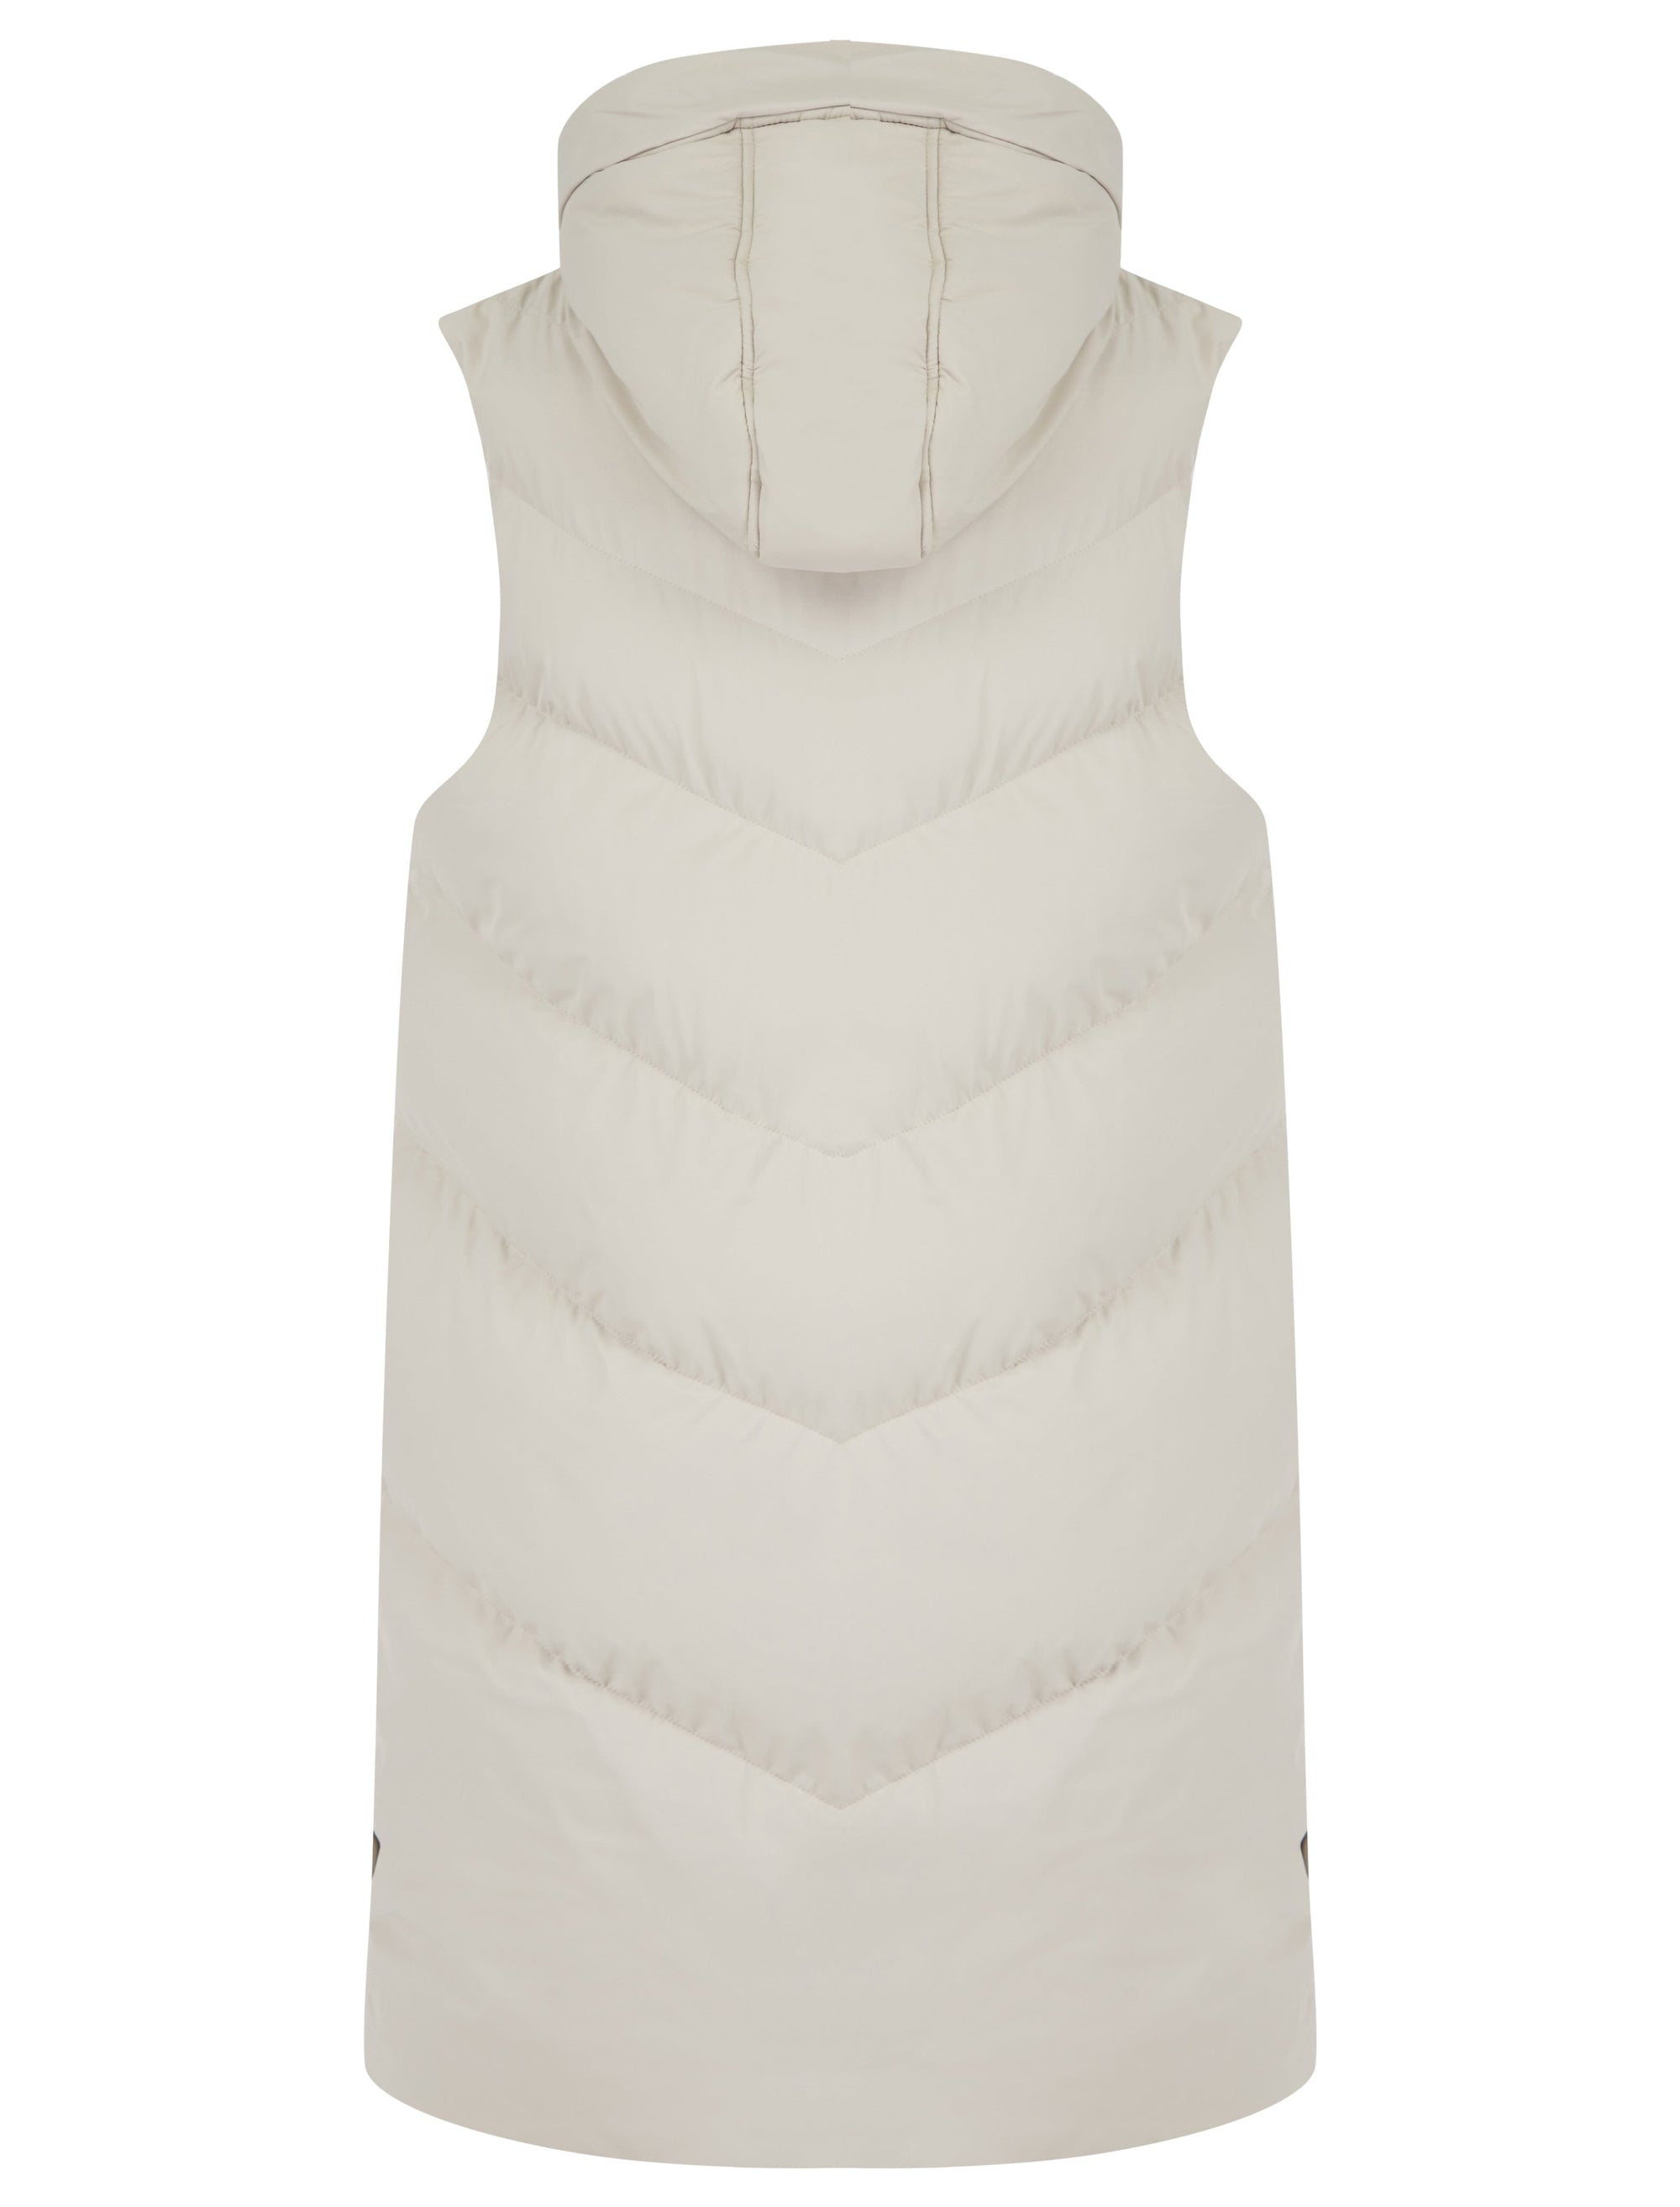 OYSTER QUILTED HOODED PUFFER GILET